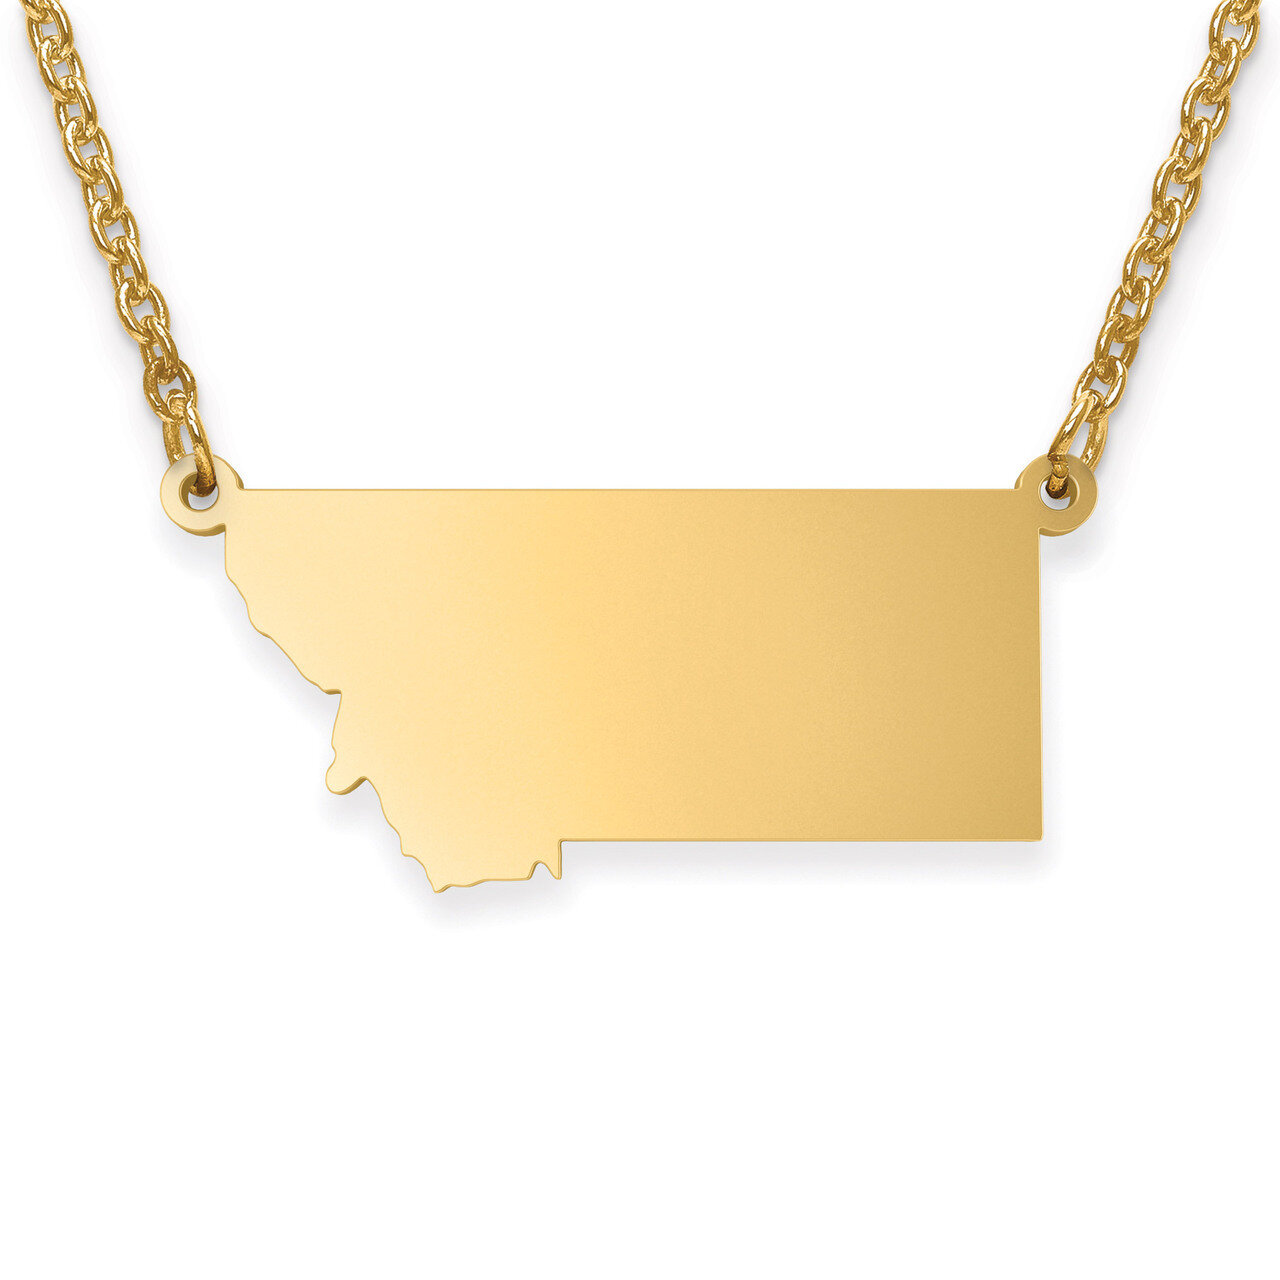 Montana State Pendant with Chain Engravable Gold-plated on Sterling Silver